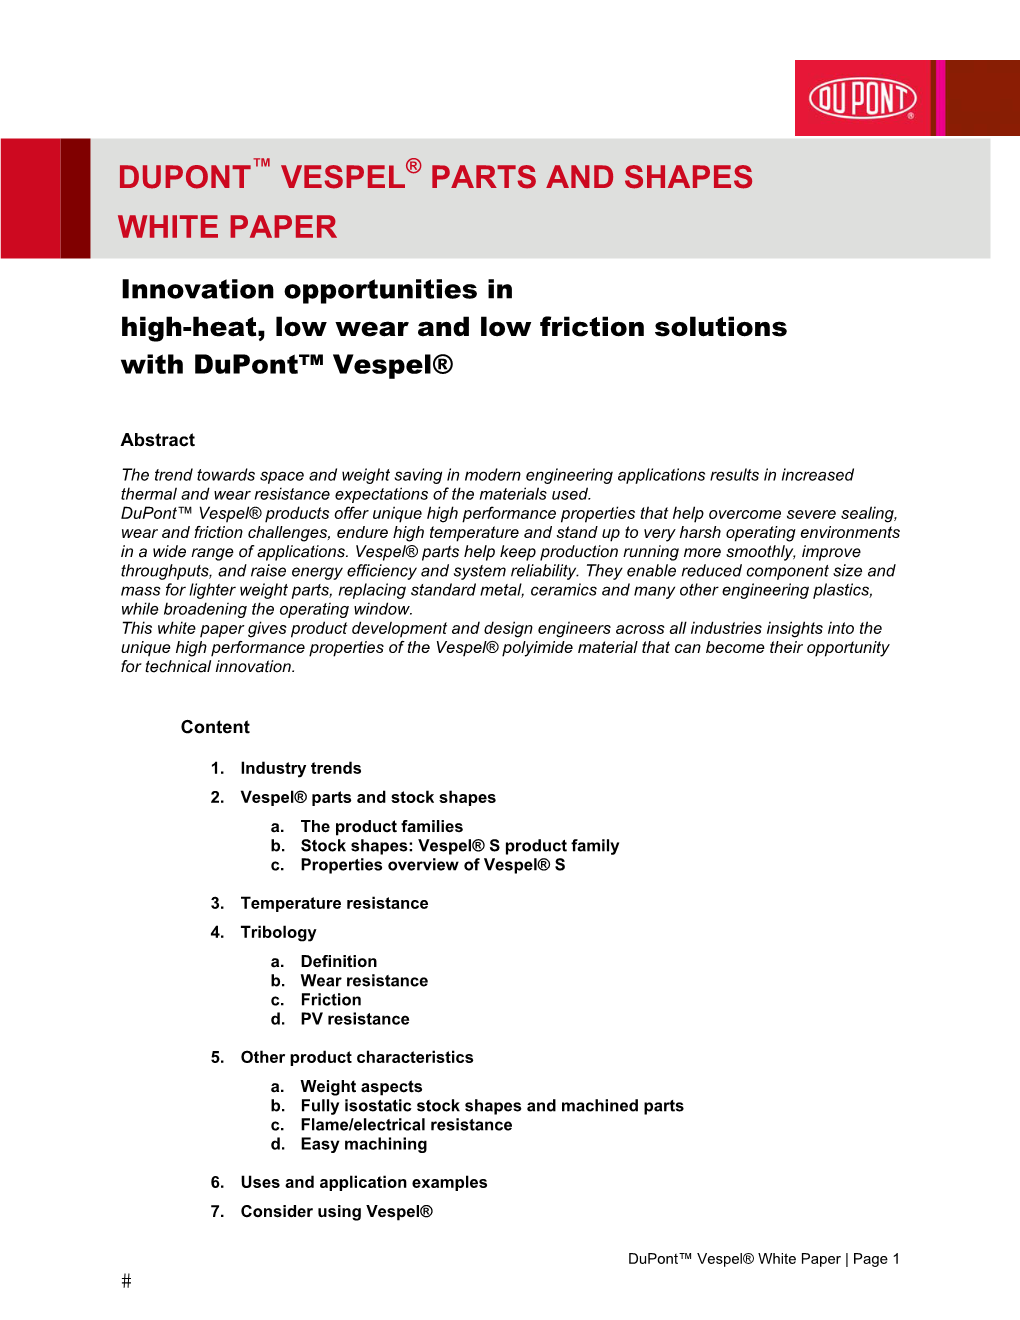 Dupont™ Vespel® Parts and Shapes White Paper